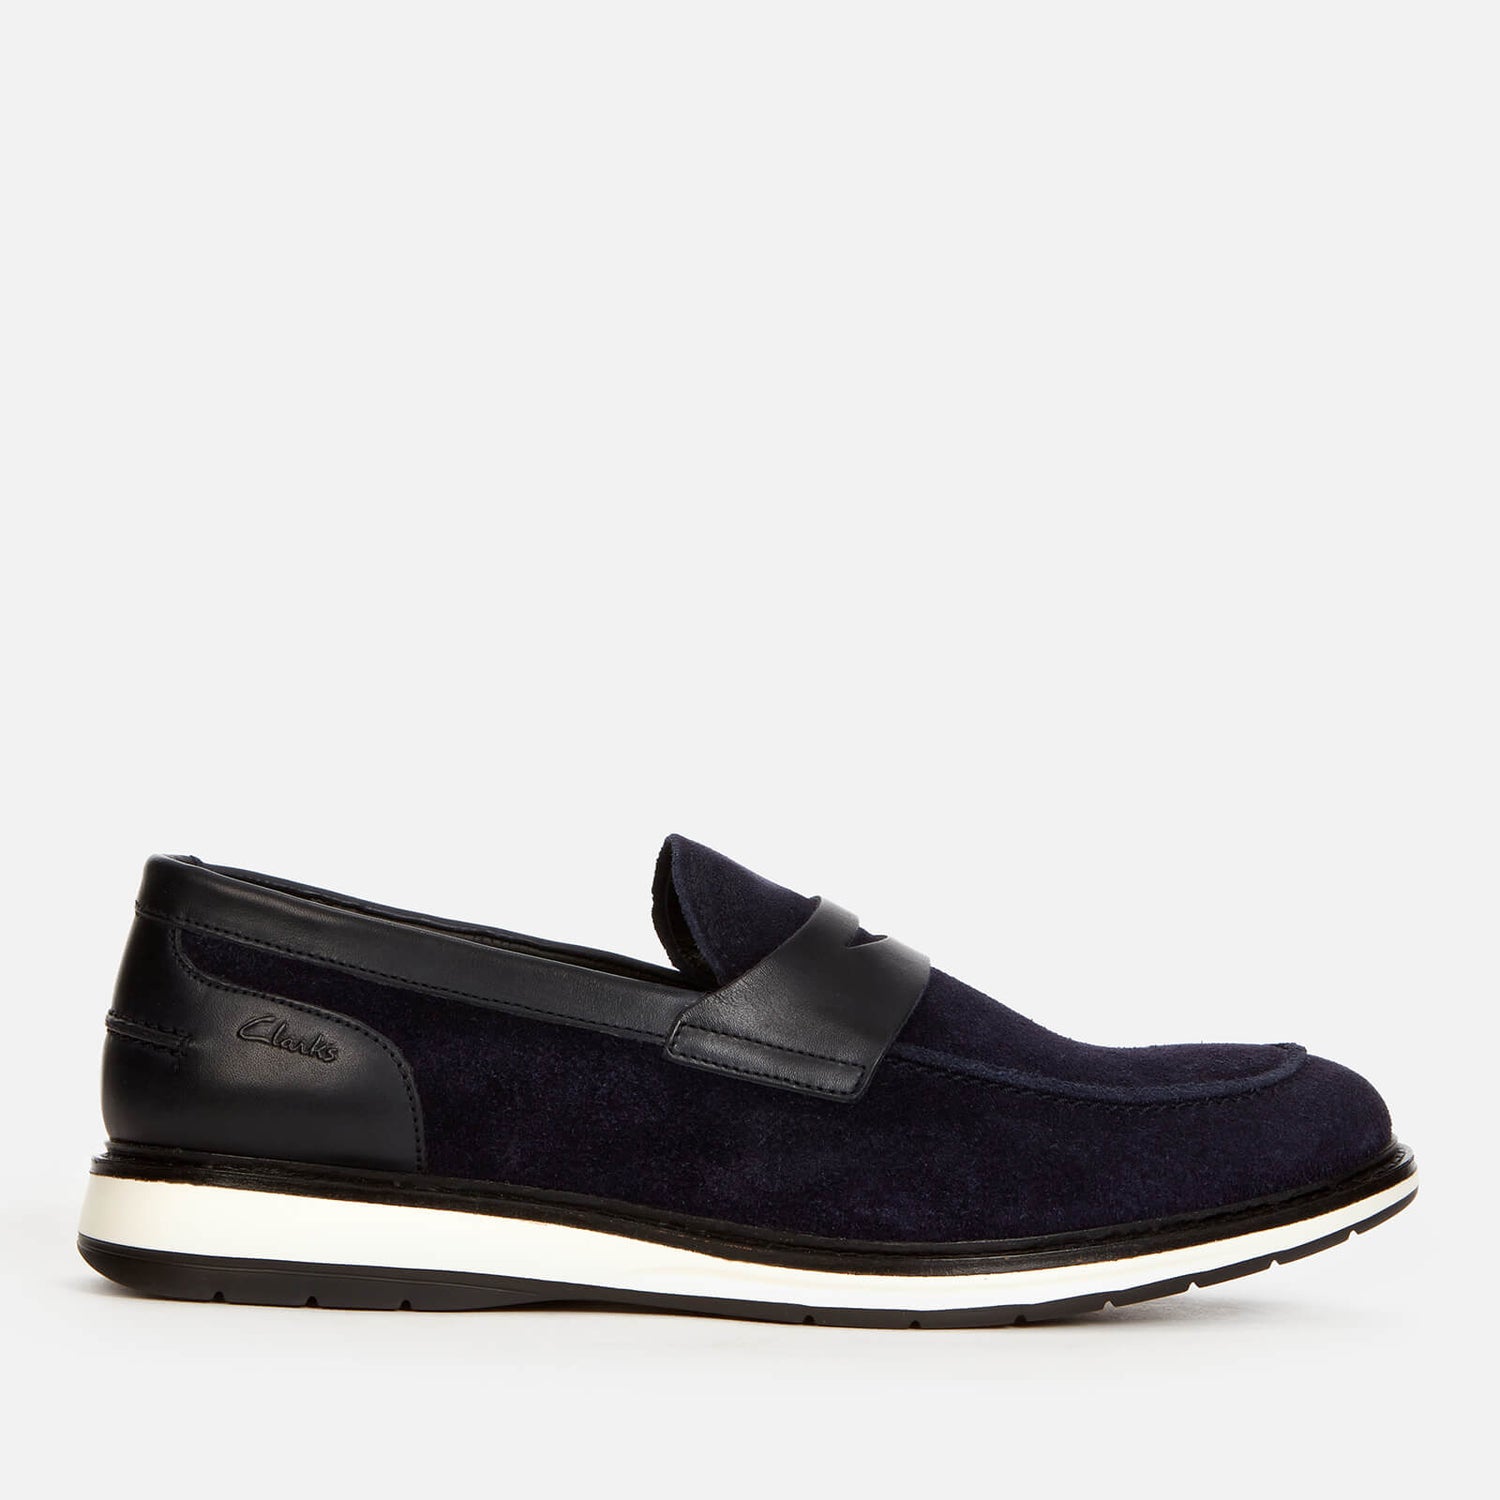 Clarks Men's Chantry Penny Suede Loafers - Navy